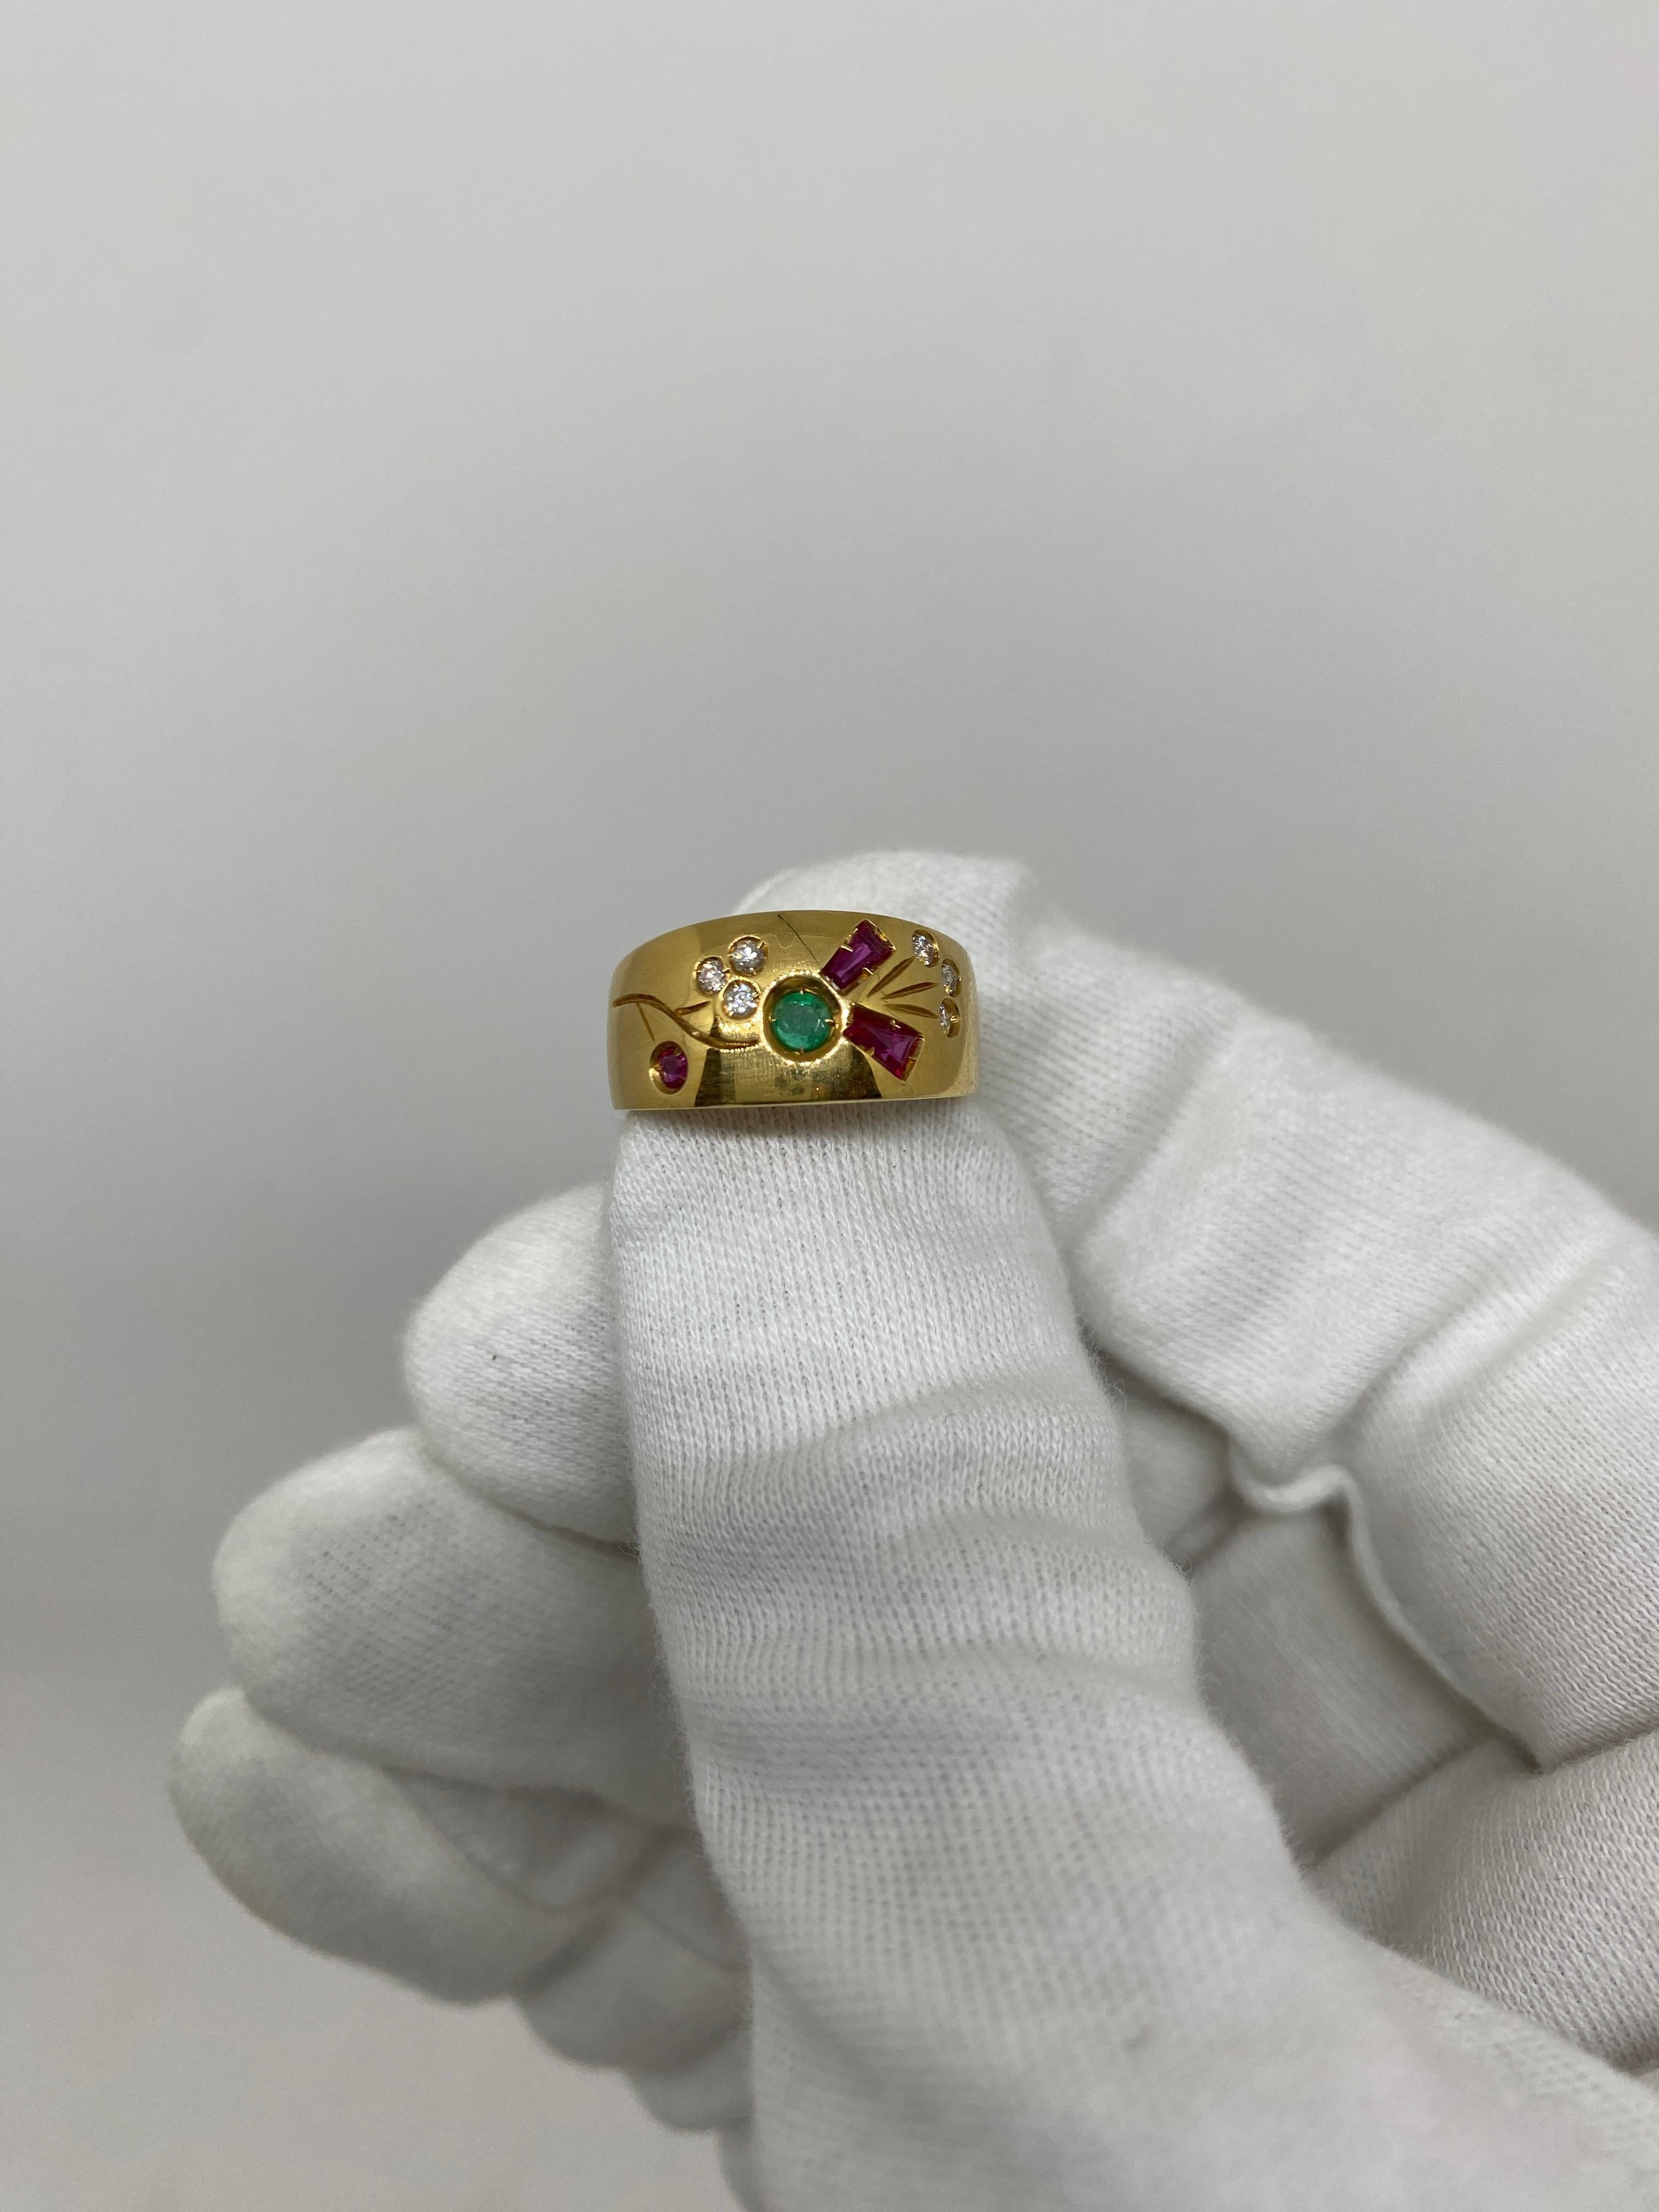 Band ring made of 18kt yellow gold with natural white brilliant-cut diamonds, red rubies and a round-cut green emerald

Welcome to our jewelry collection, where every piece tells a story of timeless elegance and unparalleled craftsmanship. As a